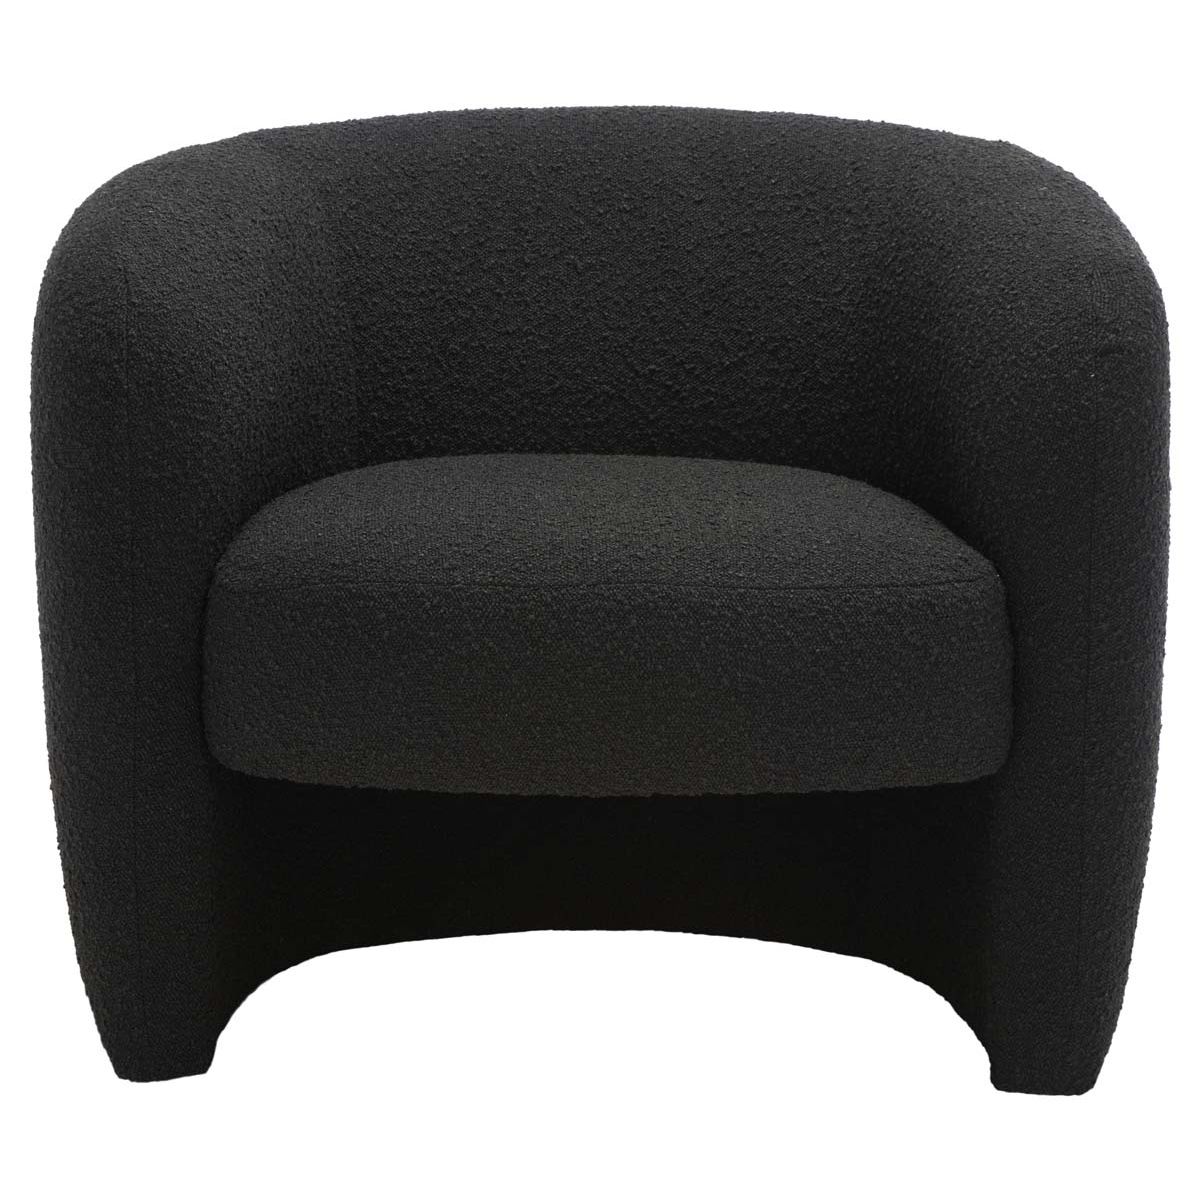 Safavieh Couture Everly Barrel Back Accent Chair - Black